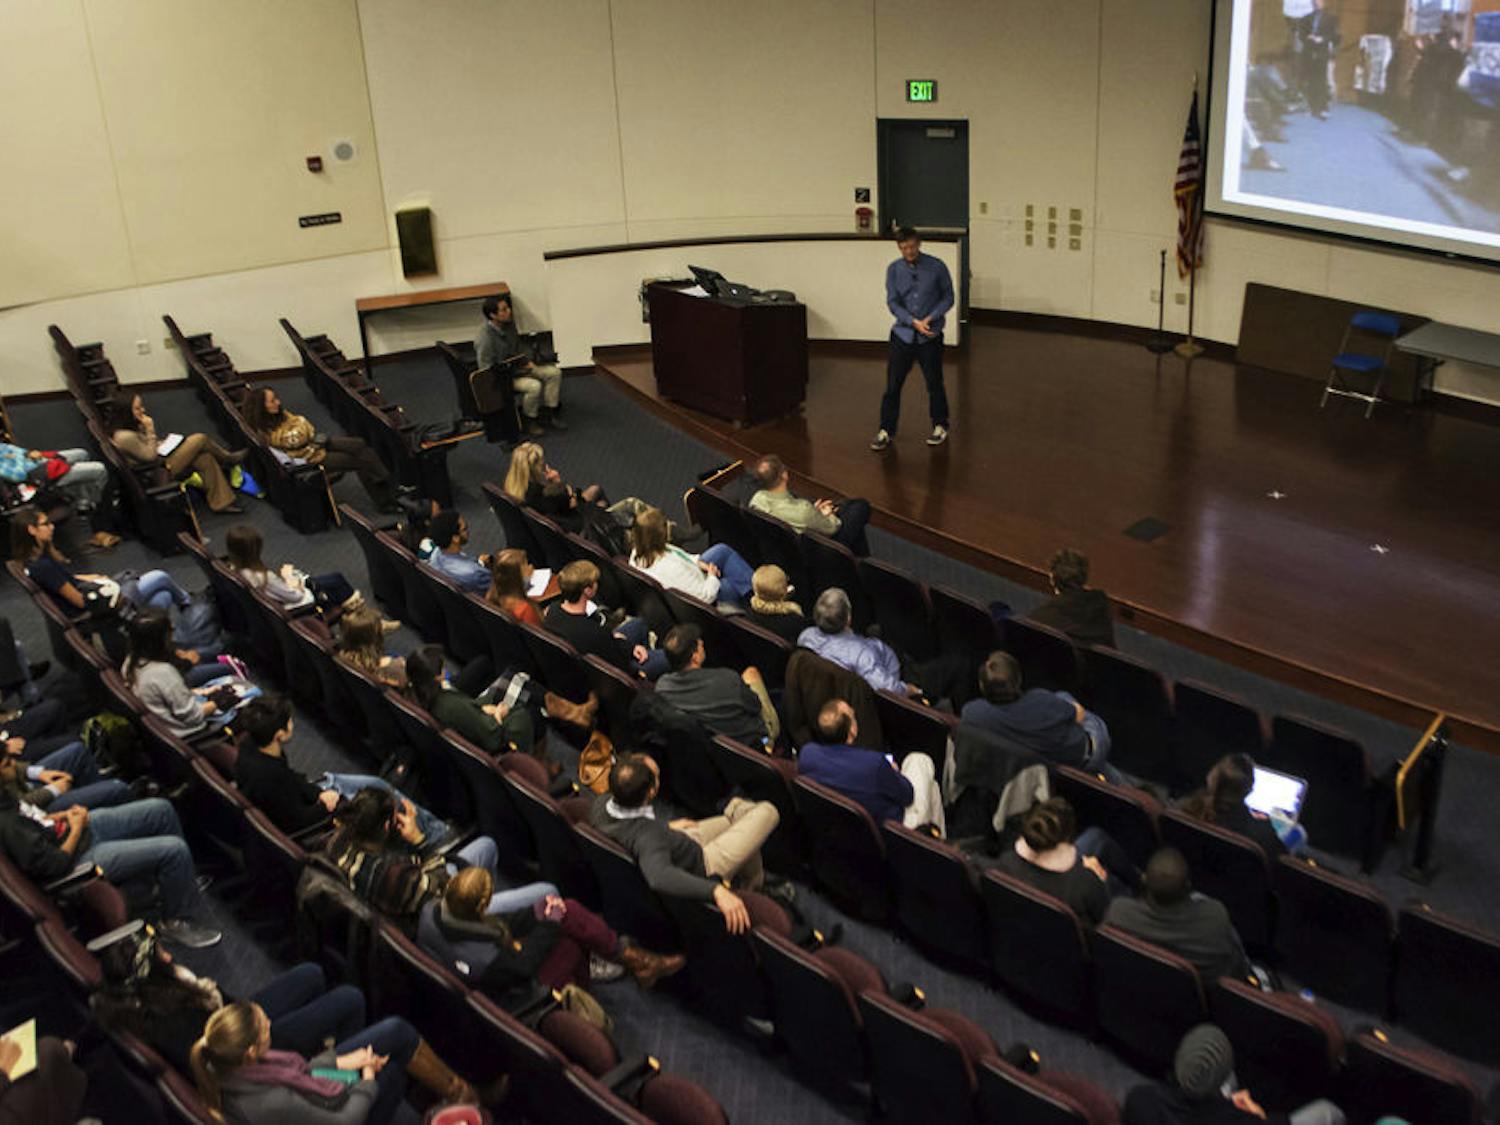 Mark Lynas, an author, environmental activist and visiting fellow at Cornell University, gives his presentation, “GMOs are Green: How an Environmentalist Changed His Mind on Biotechnology” to students in the Health Professions, Nursing and Pharmacy Auditorium on Thursday, Jan. 8.